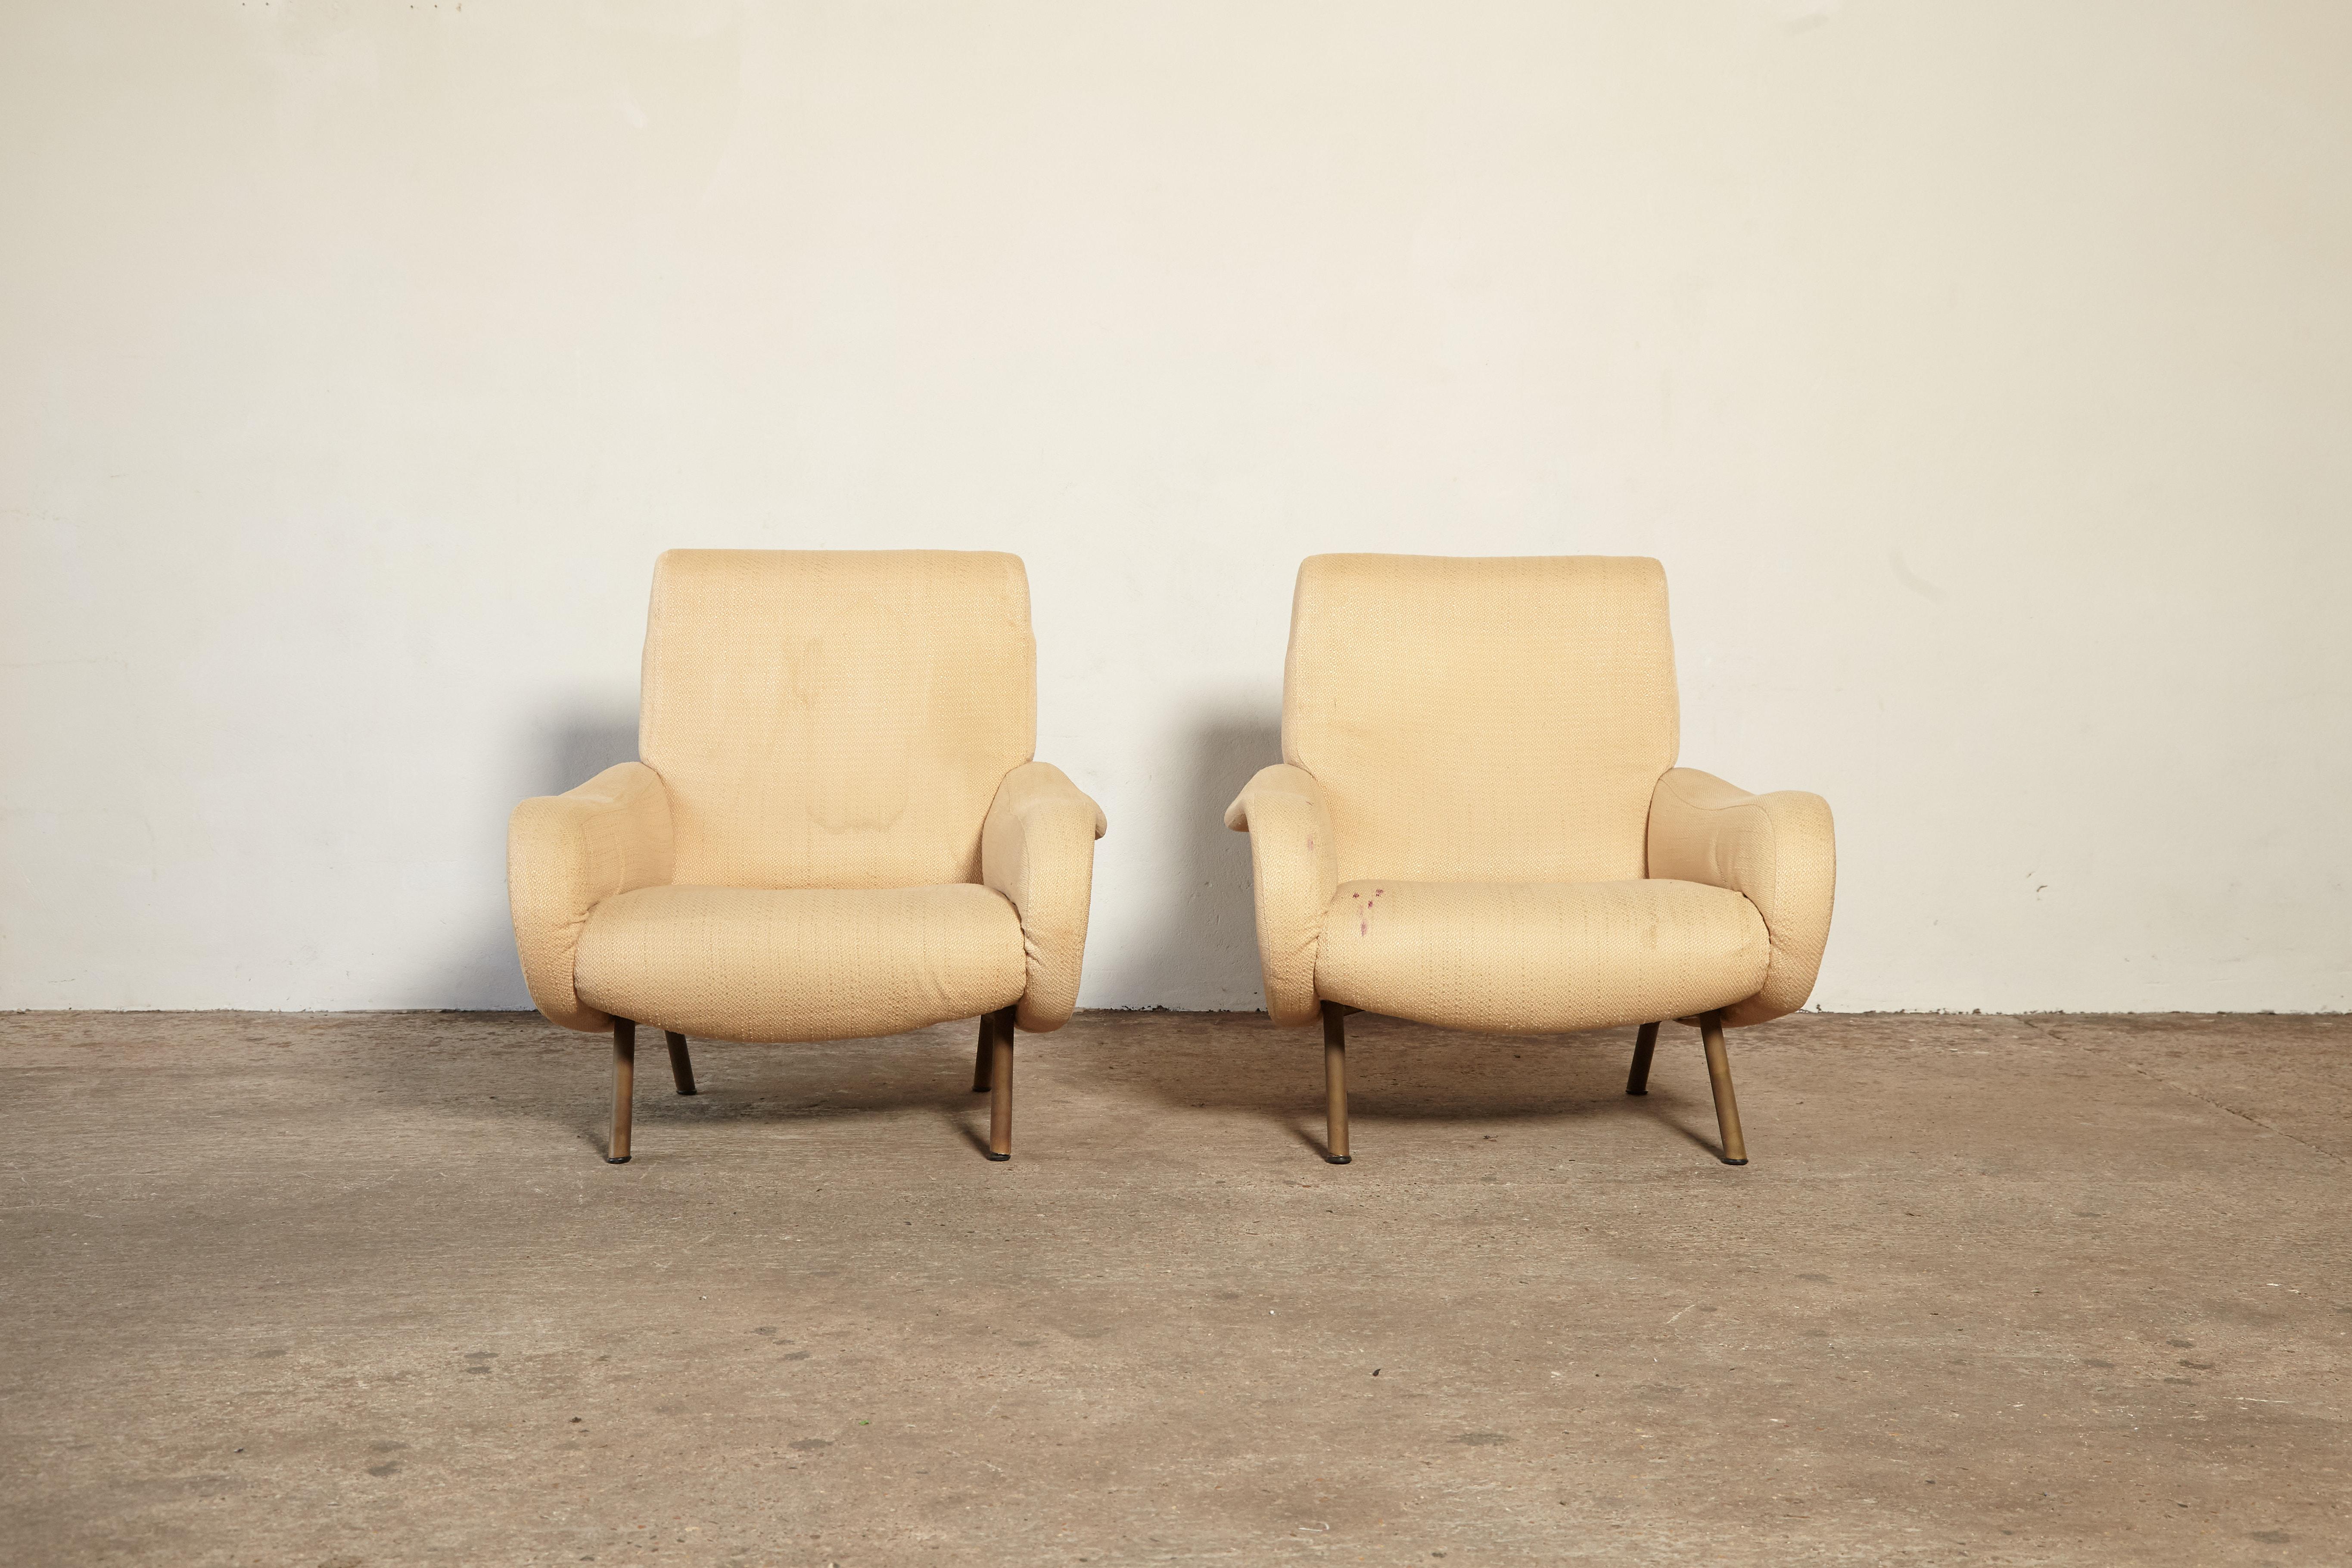 20th Century Marco Zanuso Lady Chairs, Arflex, Italy, 1950s, Includes Reupholstery in COM